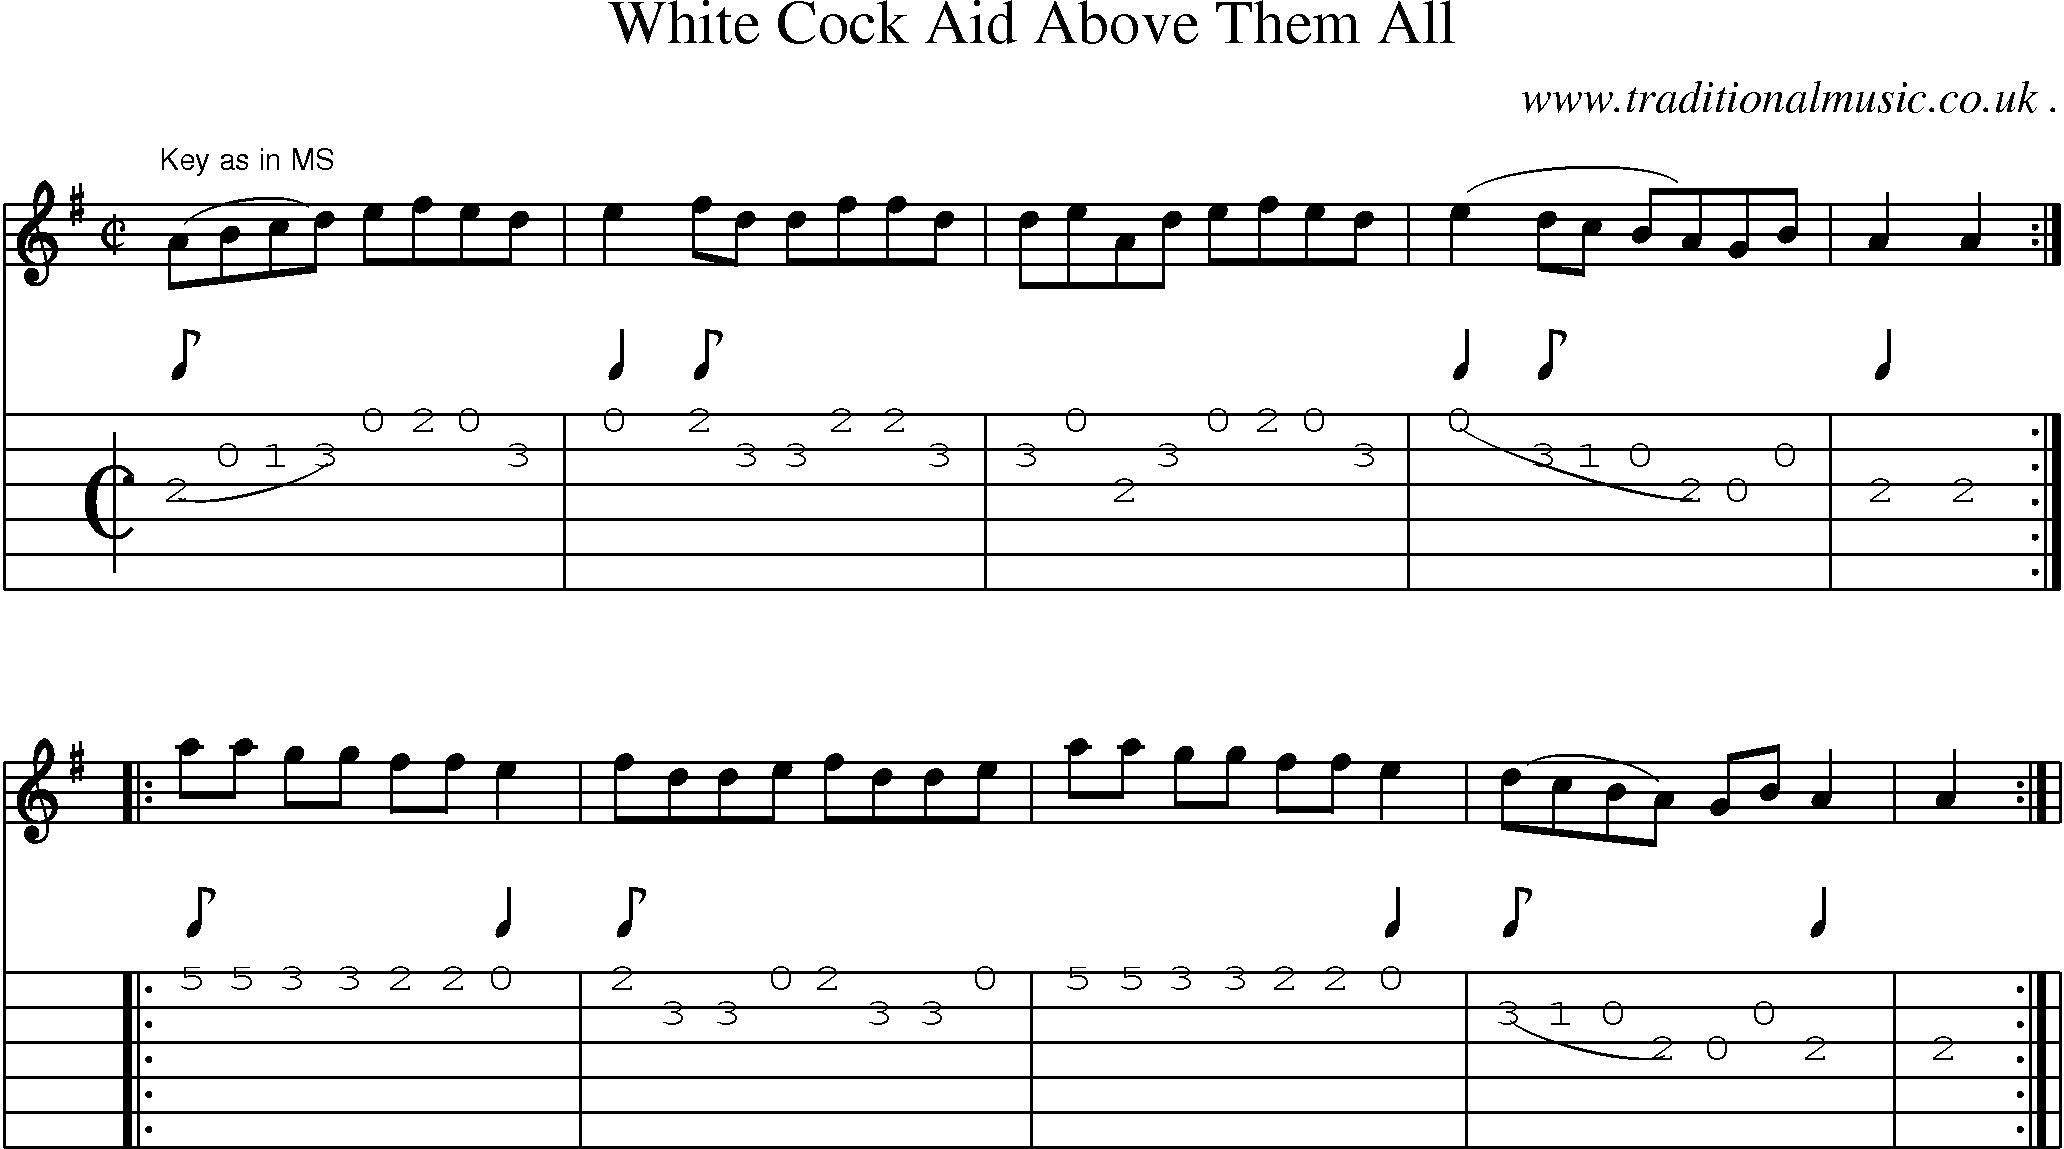 Sheet-Music and Guitar Tabs for White Cock Aid Above Them All